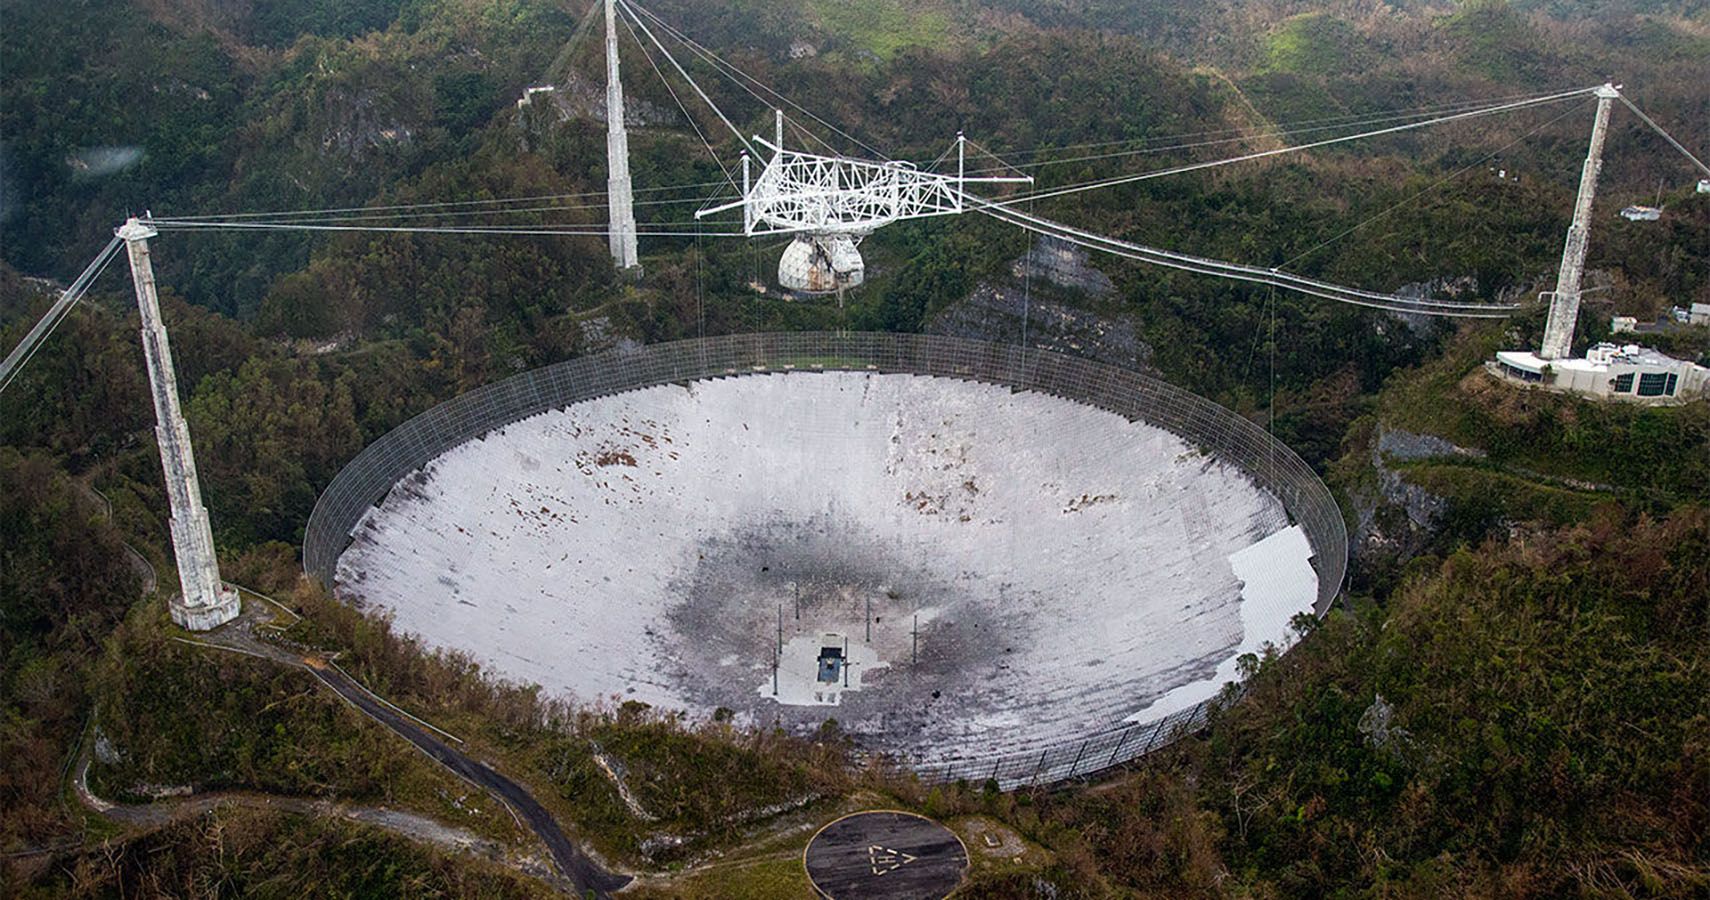 Image with public domain license of the Arecibo telescope via Sciencemag.org.